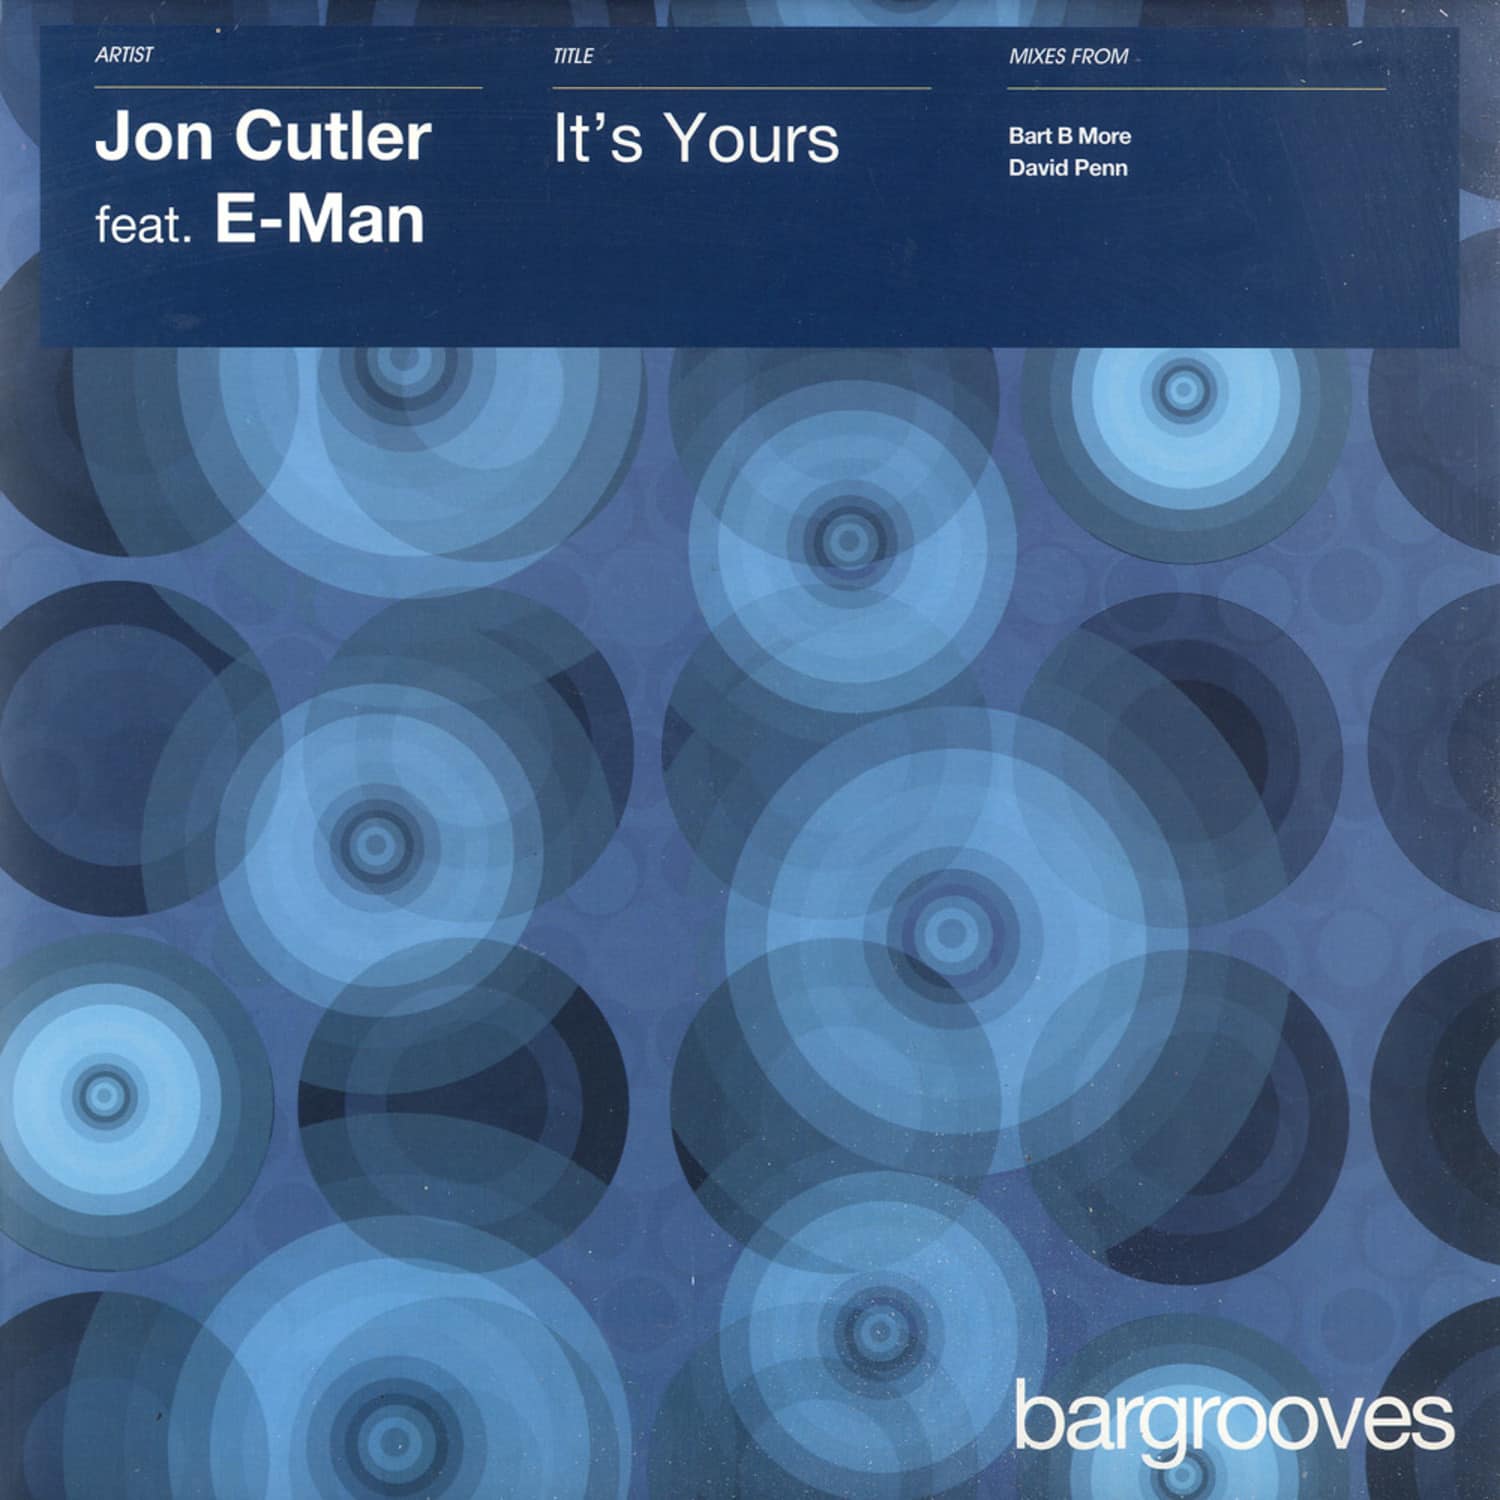 Jon Cutler - ITS YOURS